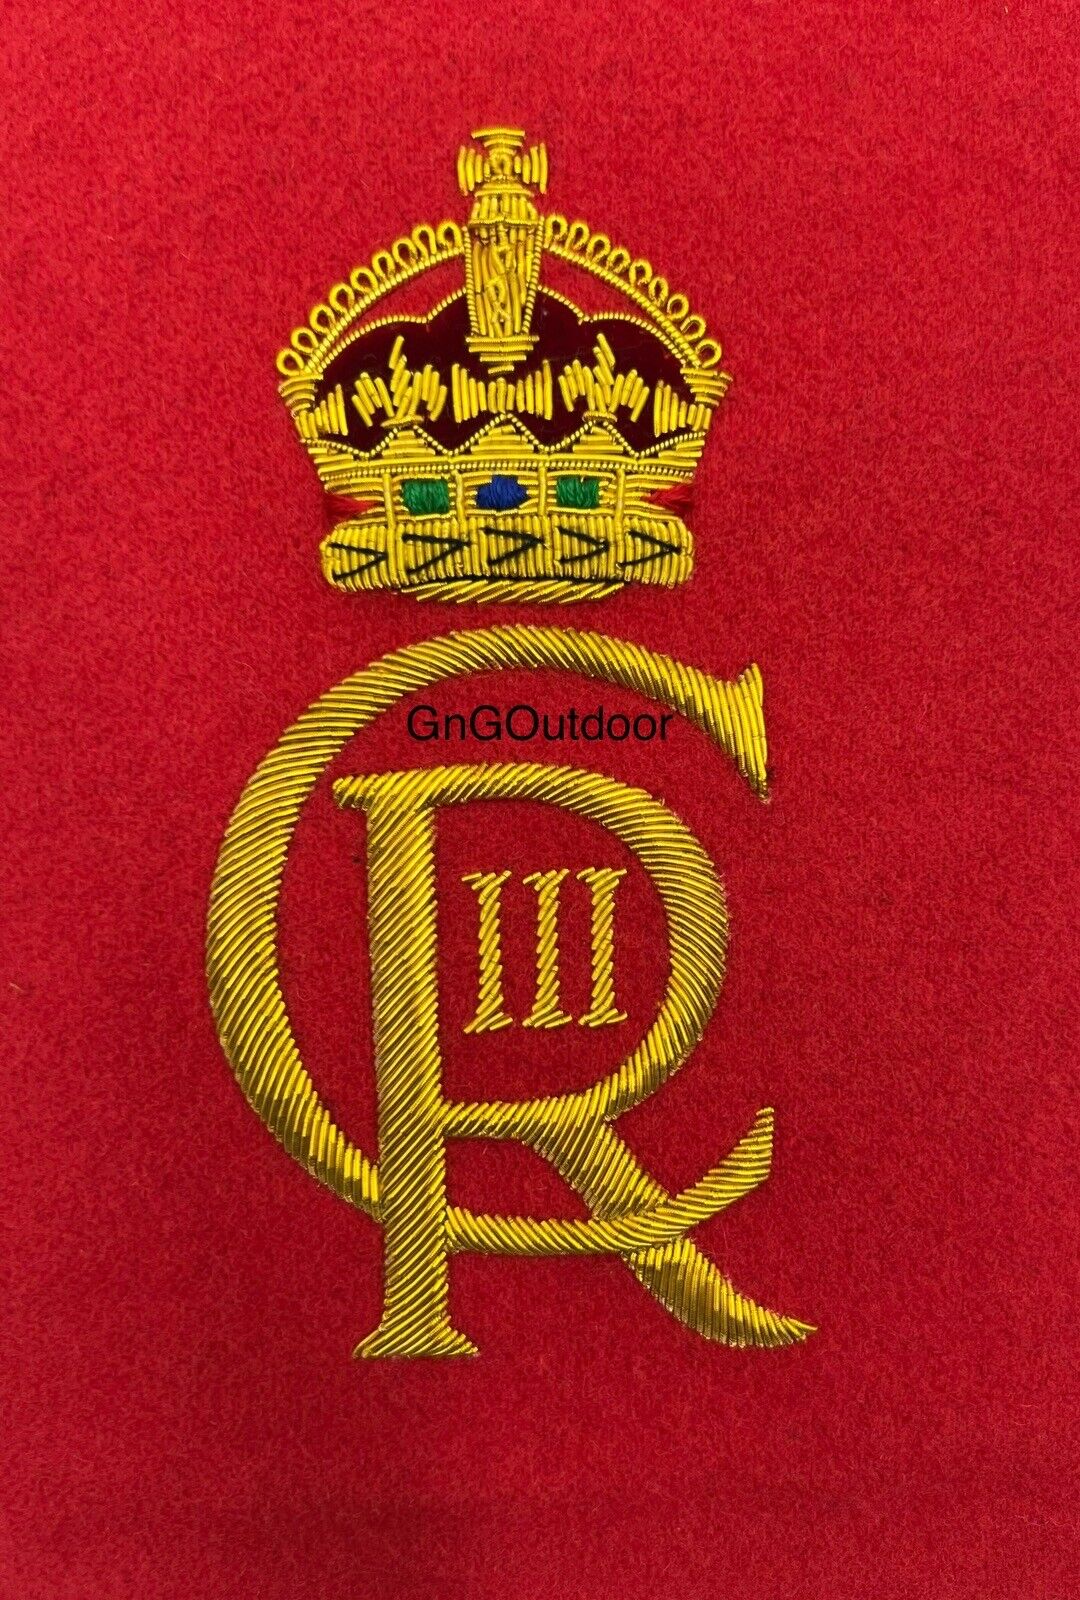 His Majesty The King’s Cypher CIIIR Gold Hand Embroidered Cypher Frame Badge